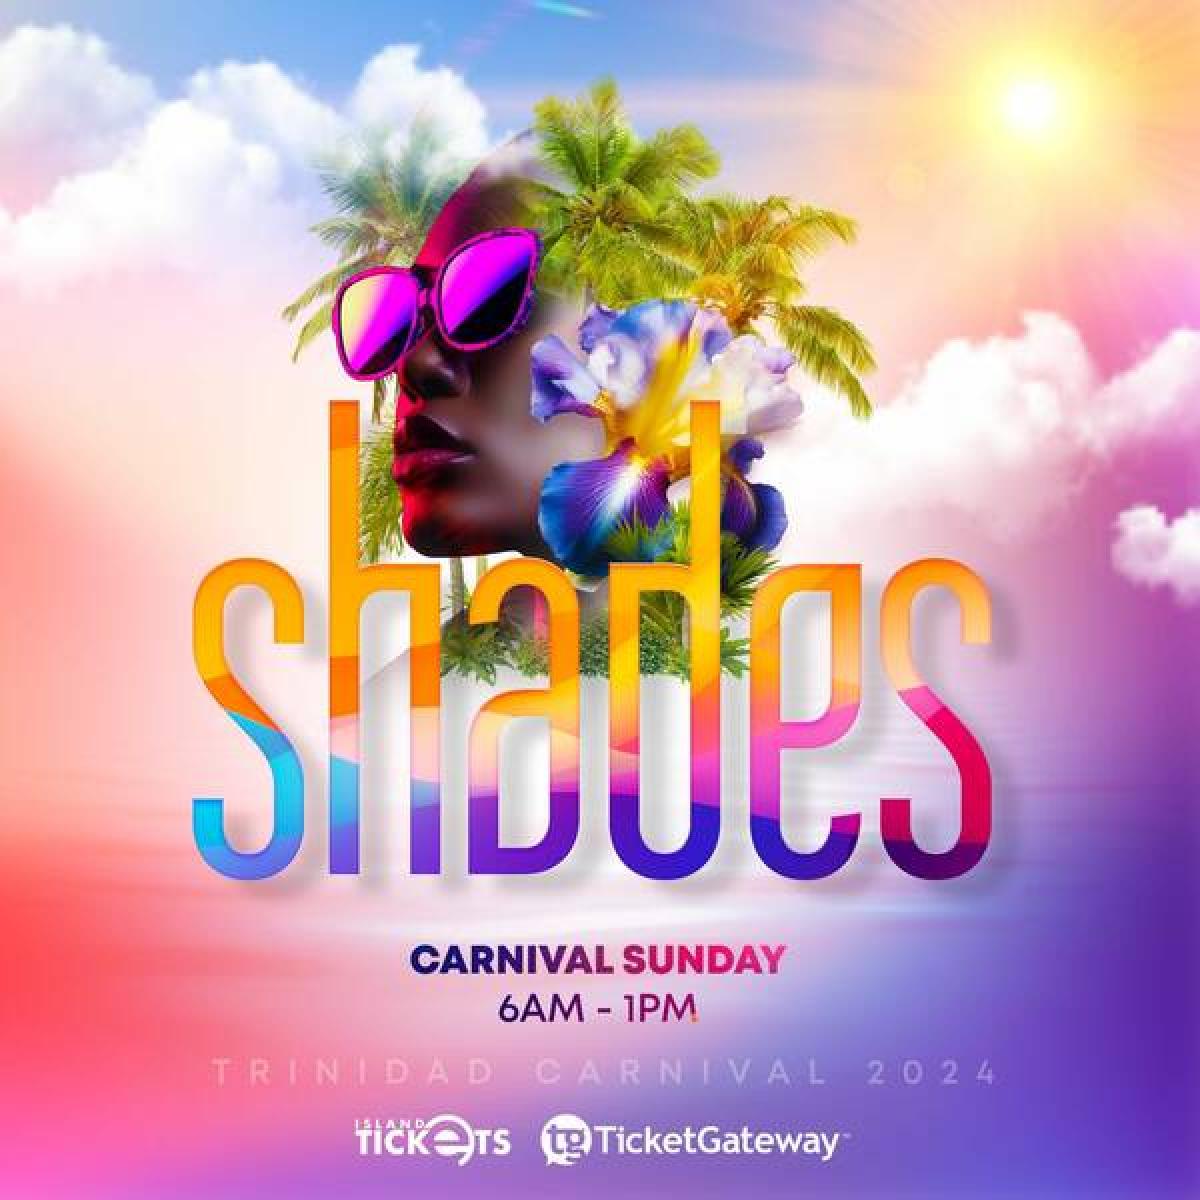 Shades Breakfast All Inclusive  flyer or graphic.